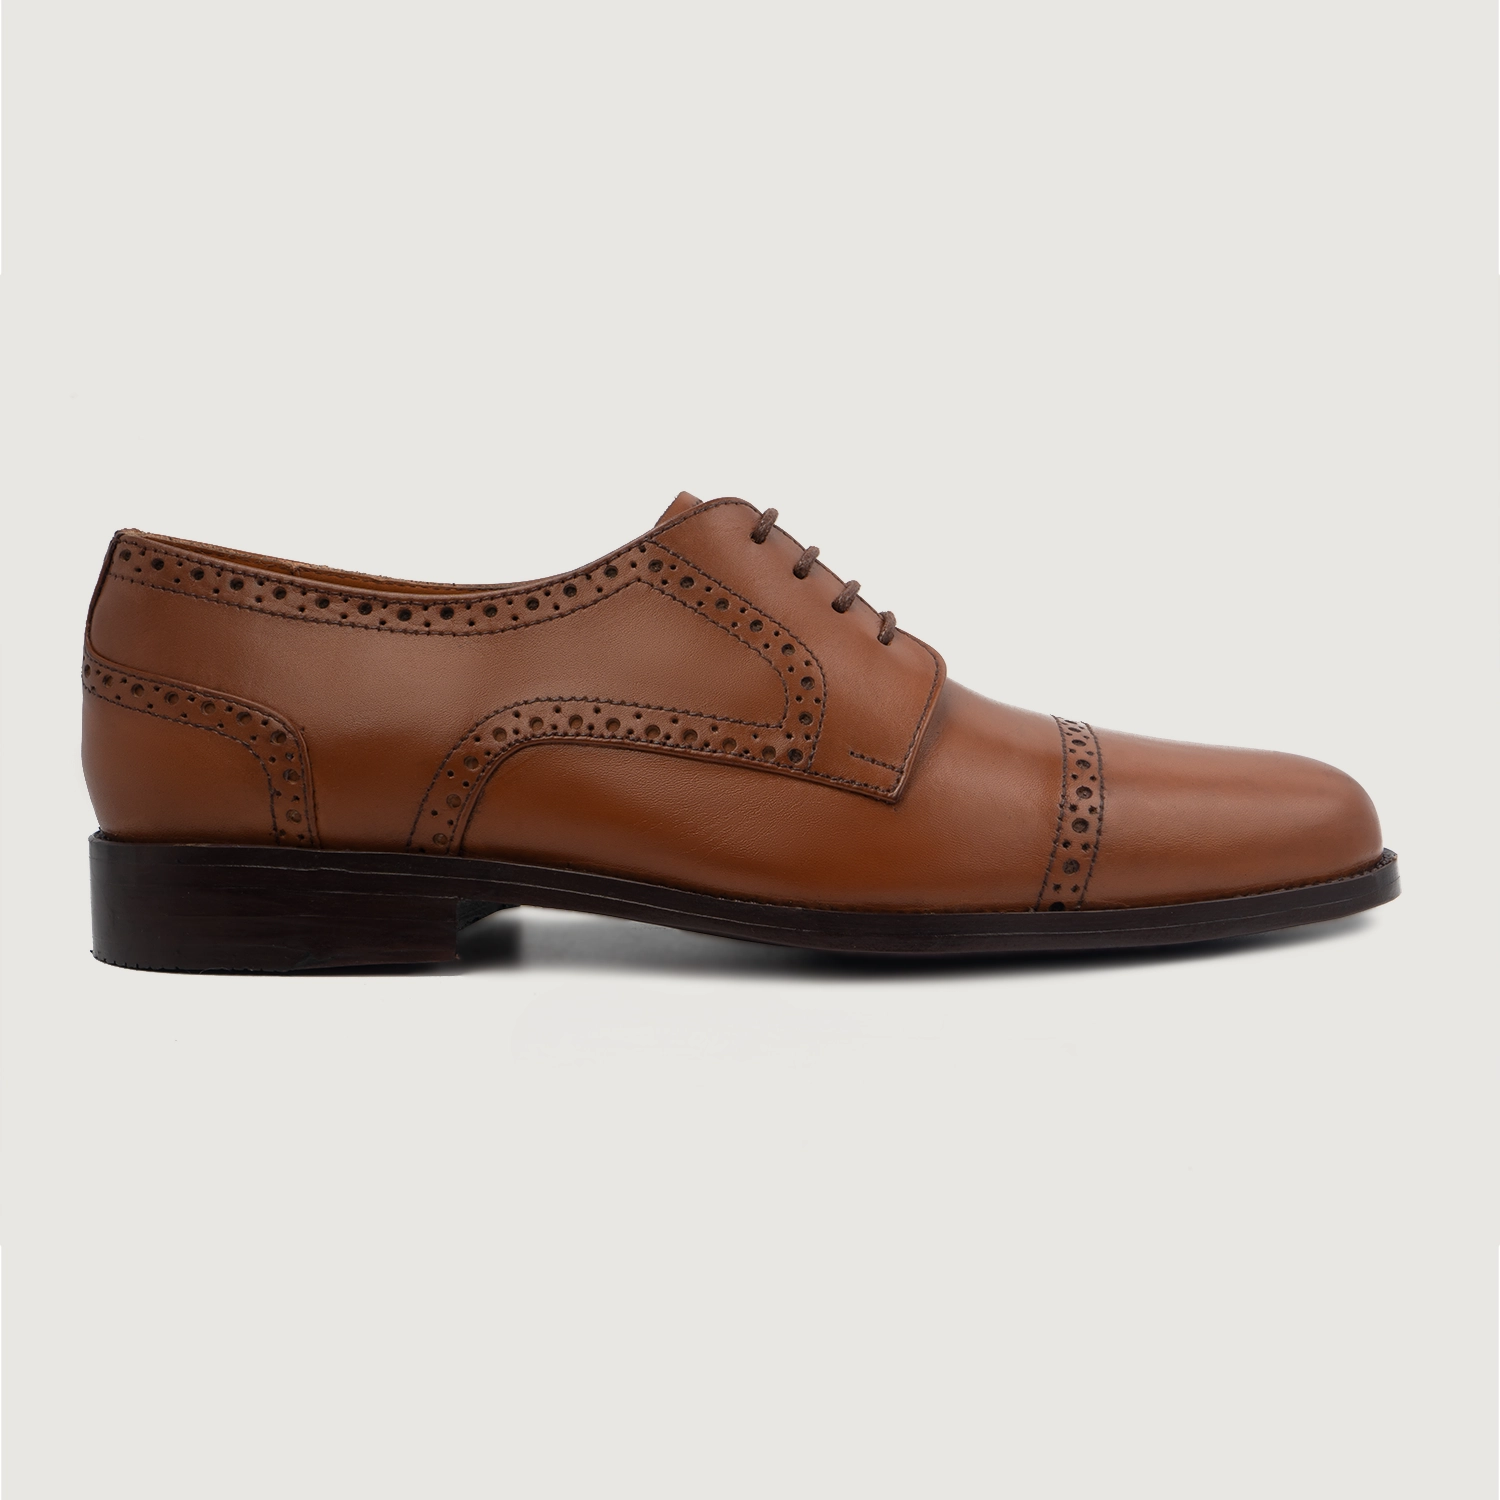 Dirk Brogues Derby Tan Leather Shoes